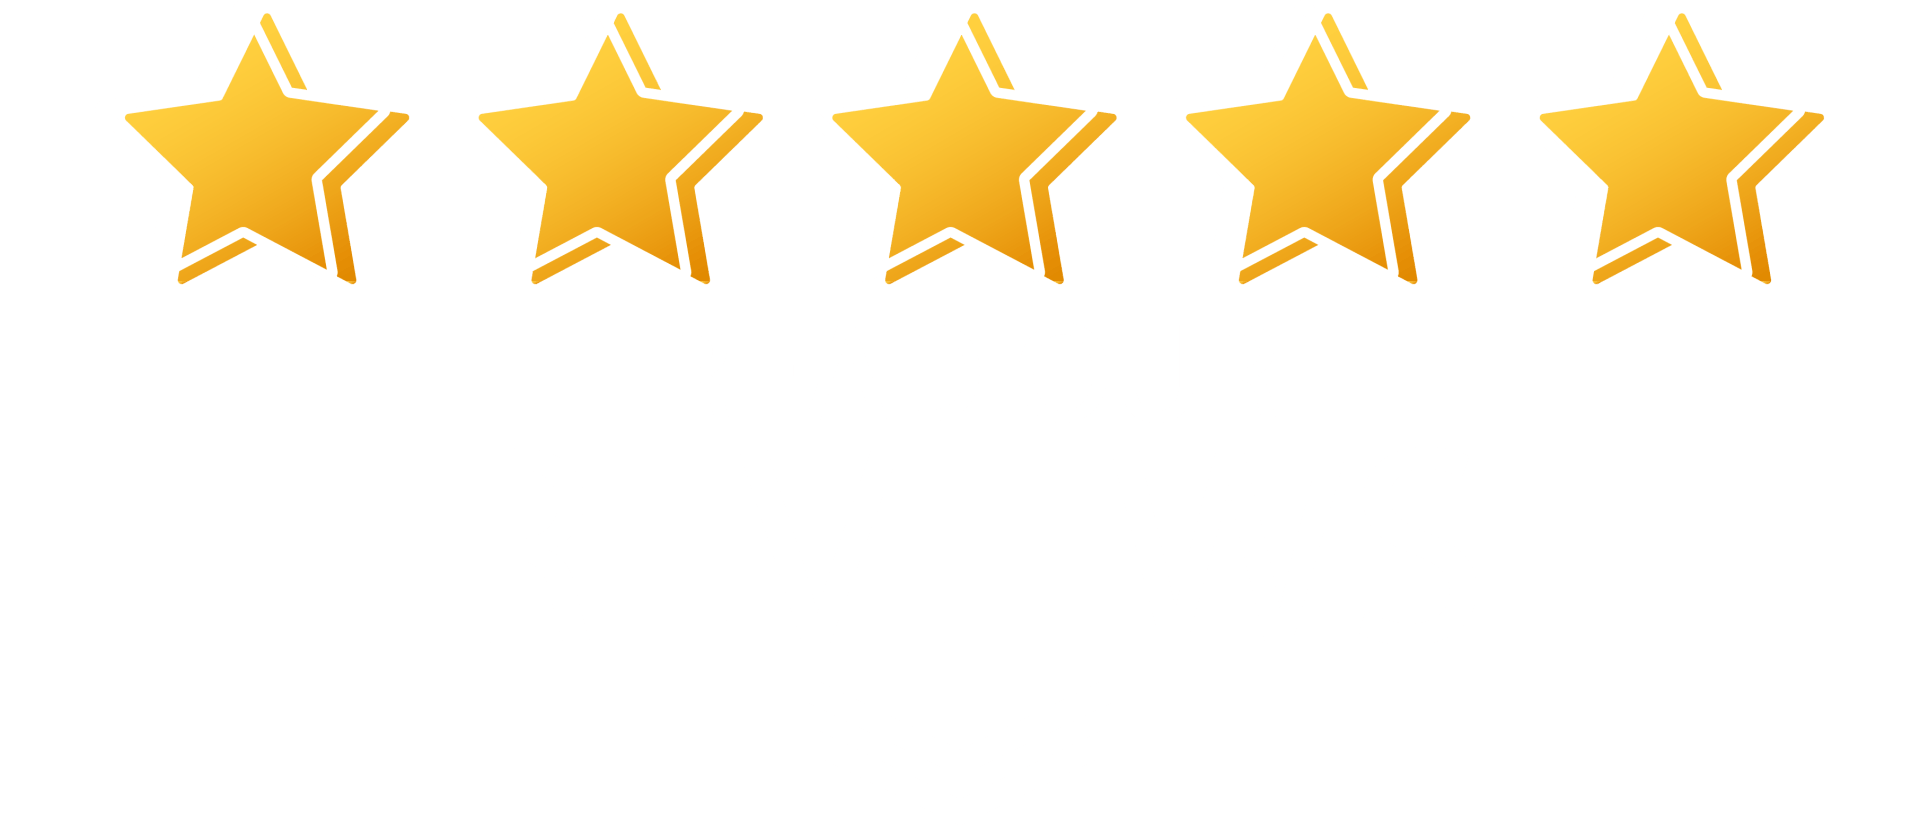 READ CUBED CREATIVE REVIEWS